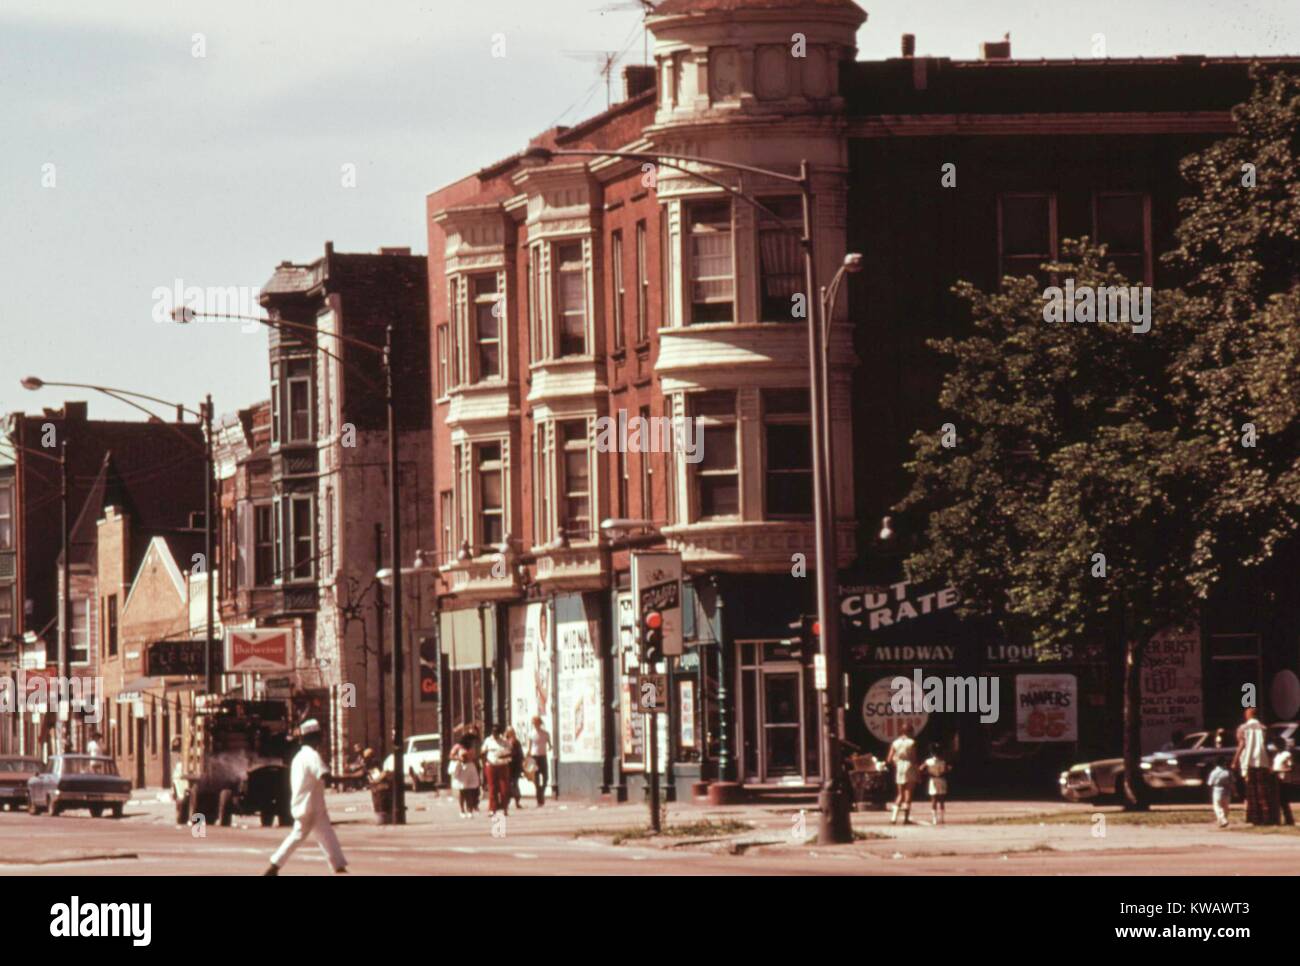 View of a community in the South Side of Chicago with small businesses and apartments over stores in older buildings, near 43rd and Indiana Avenue, Illinois, June, 1973. Image courtesy National Archives. Stock Photo